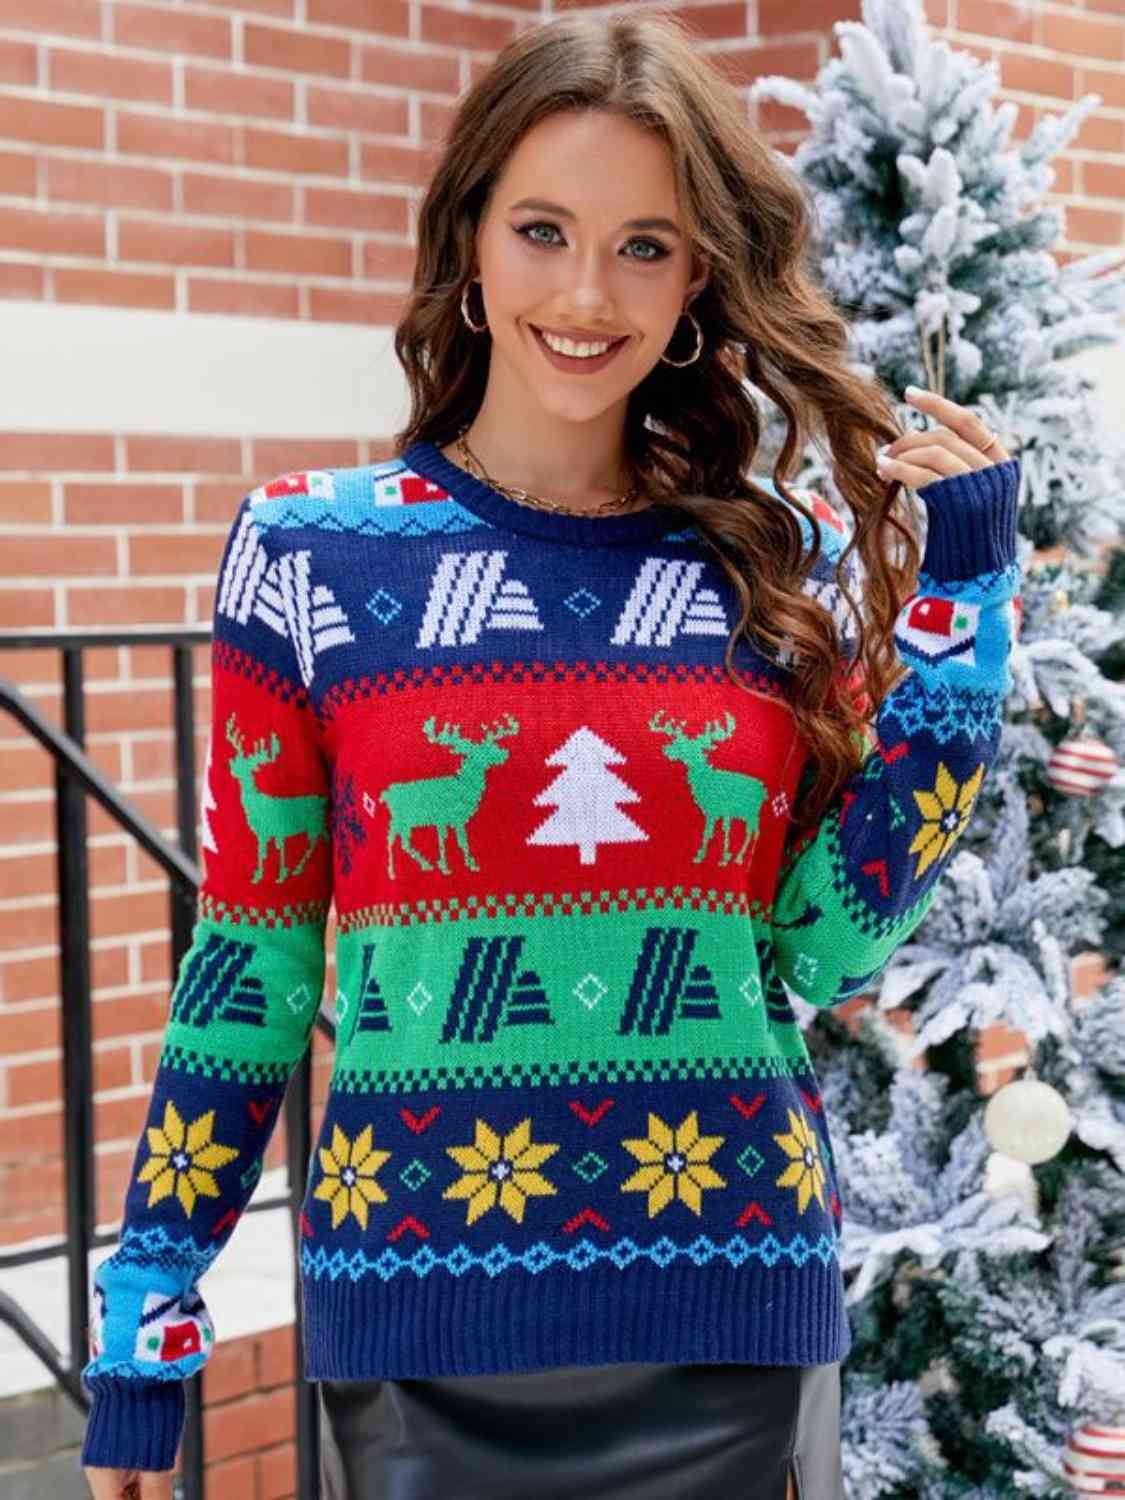 It's so Ugly Christmas Sweater